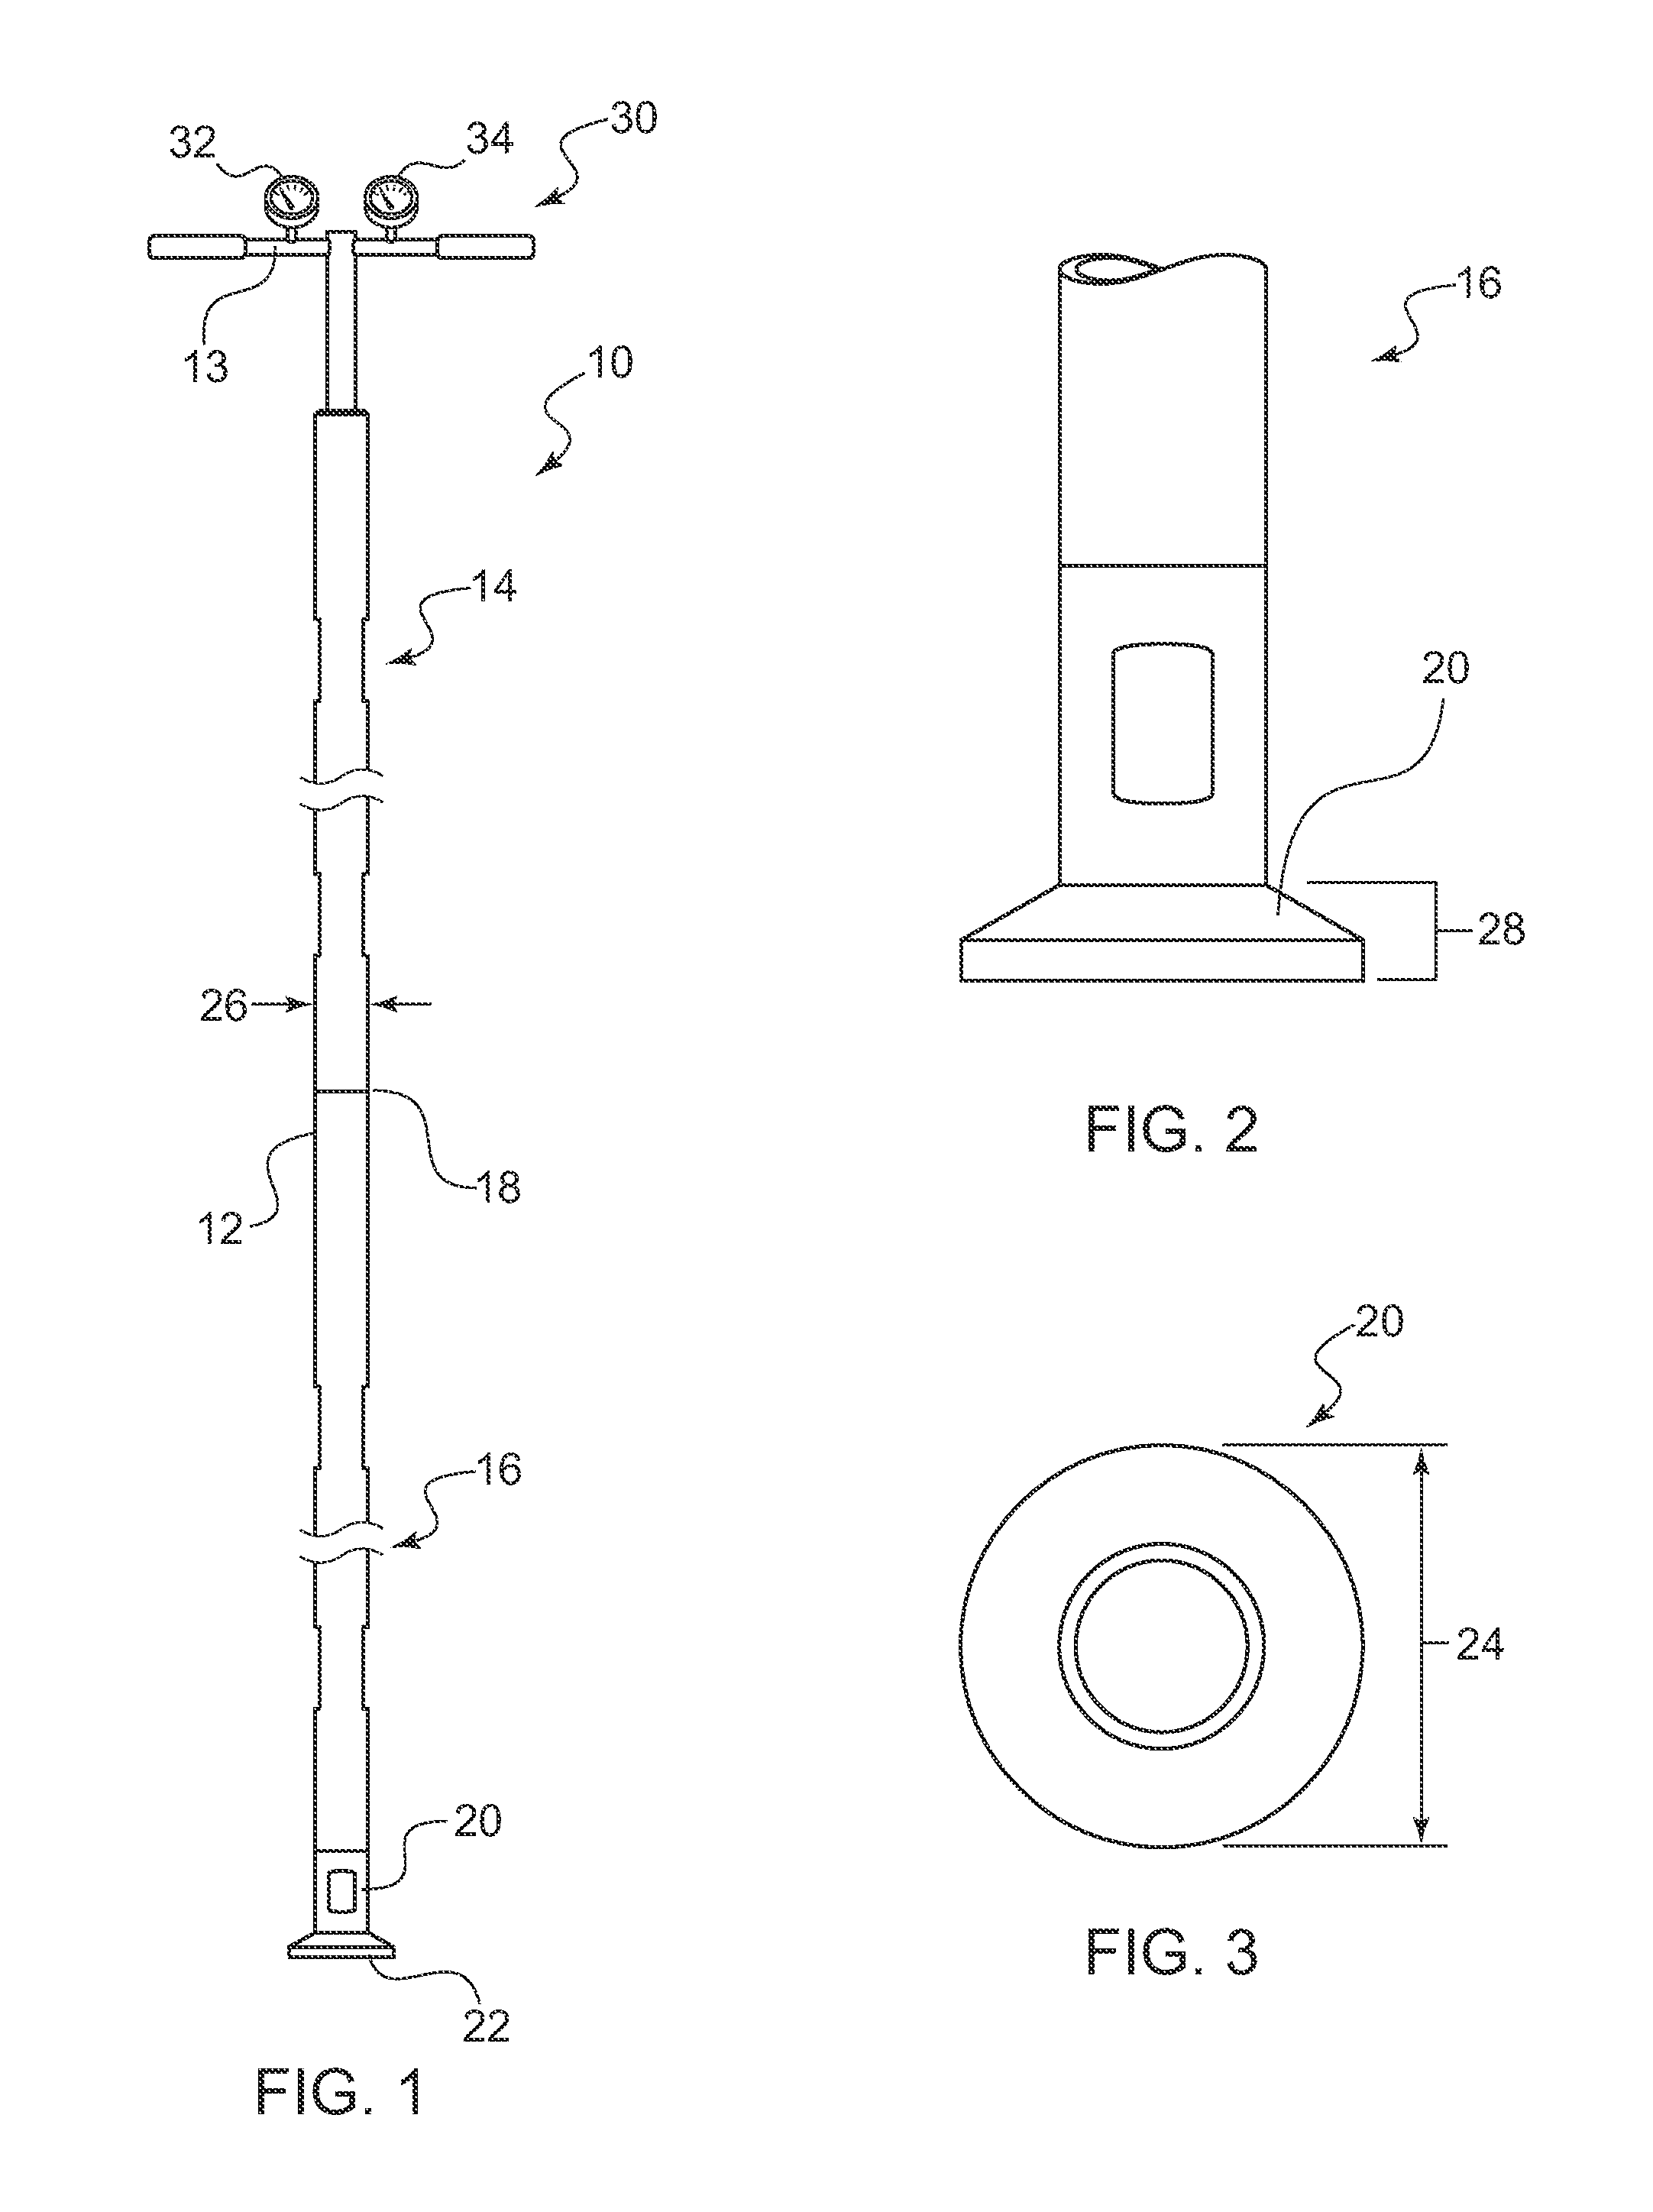 Field Strength Test Devices and Methods for Installed Engineered Material Arresting Systems